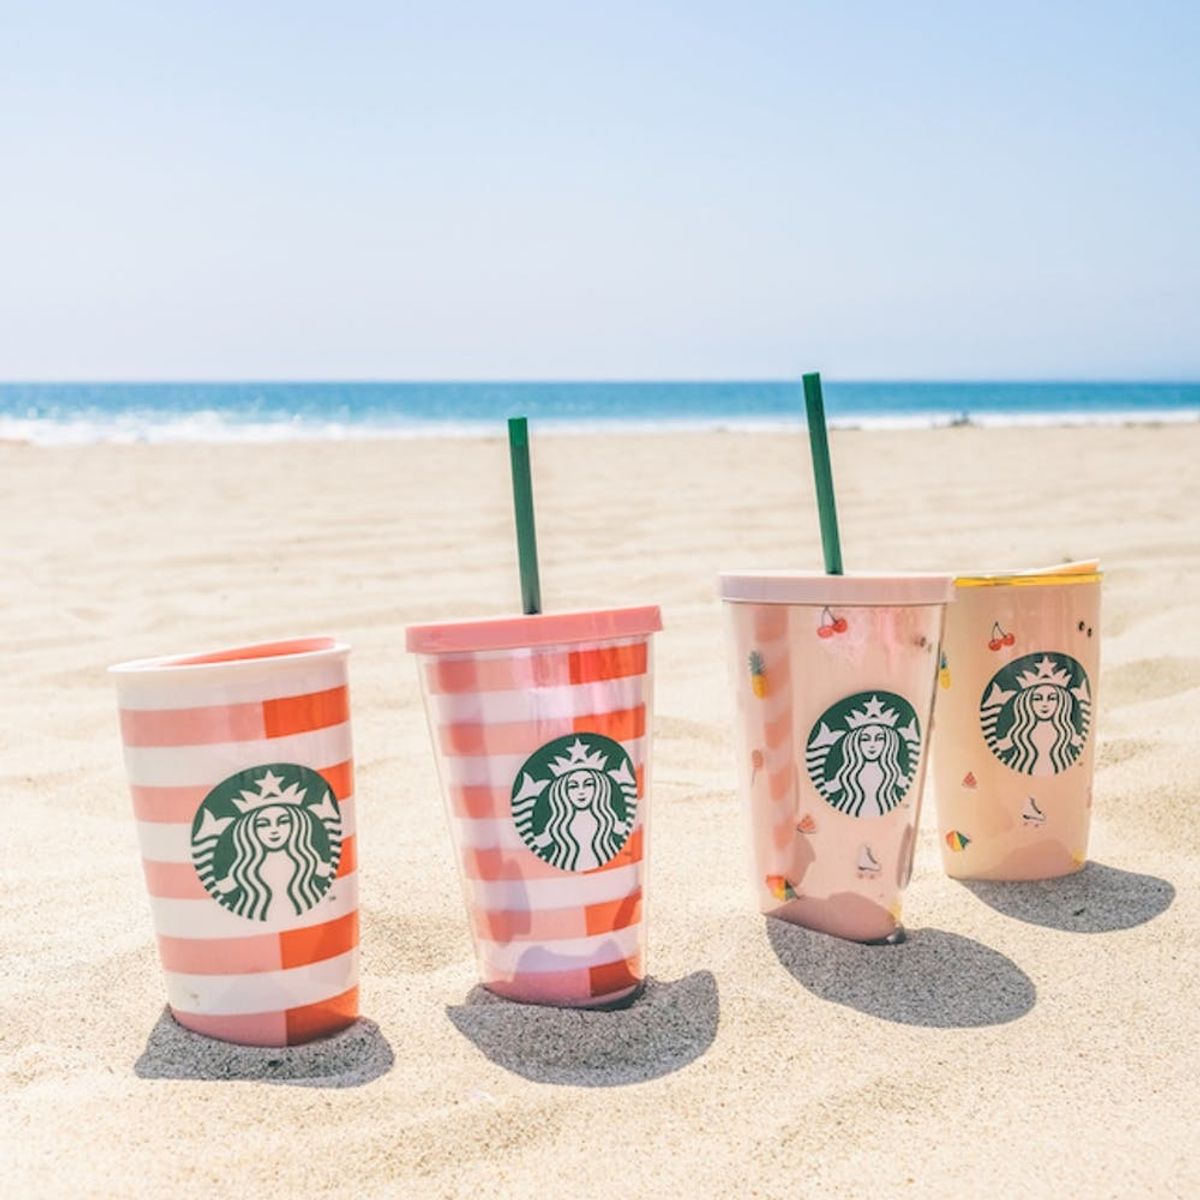 Starbucks x Ban.do Is Giving Away Their New Summery Collection RIGHT NOW